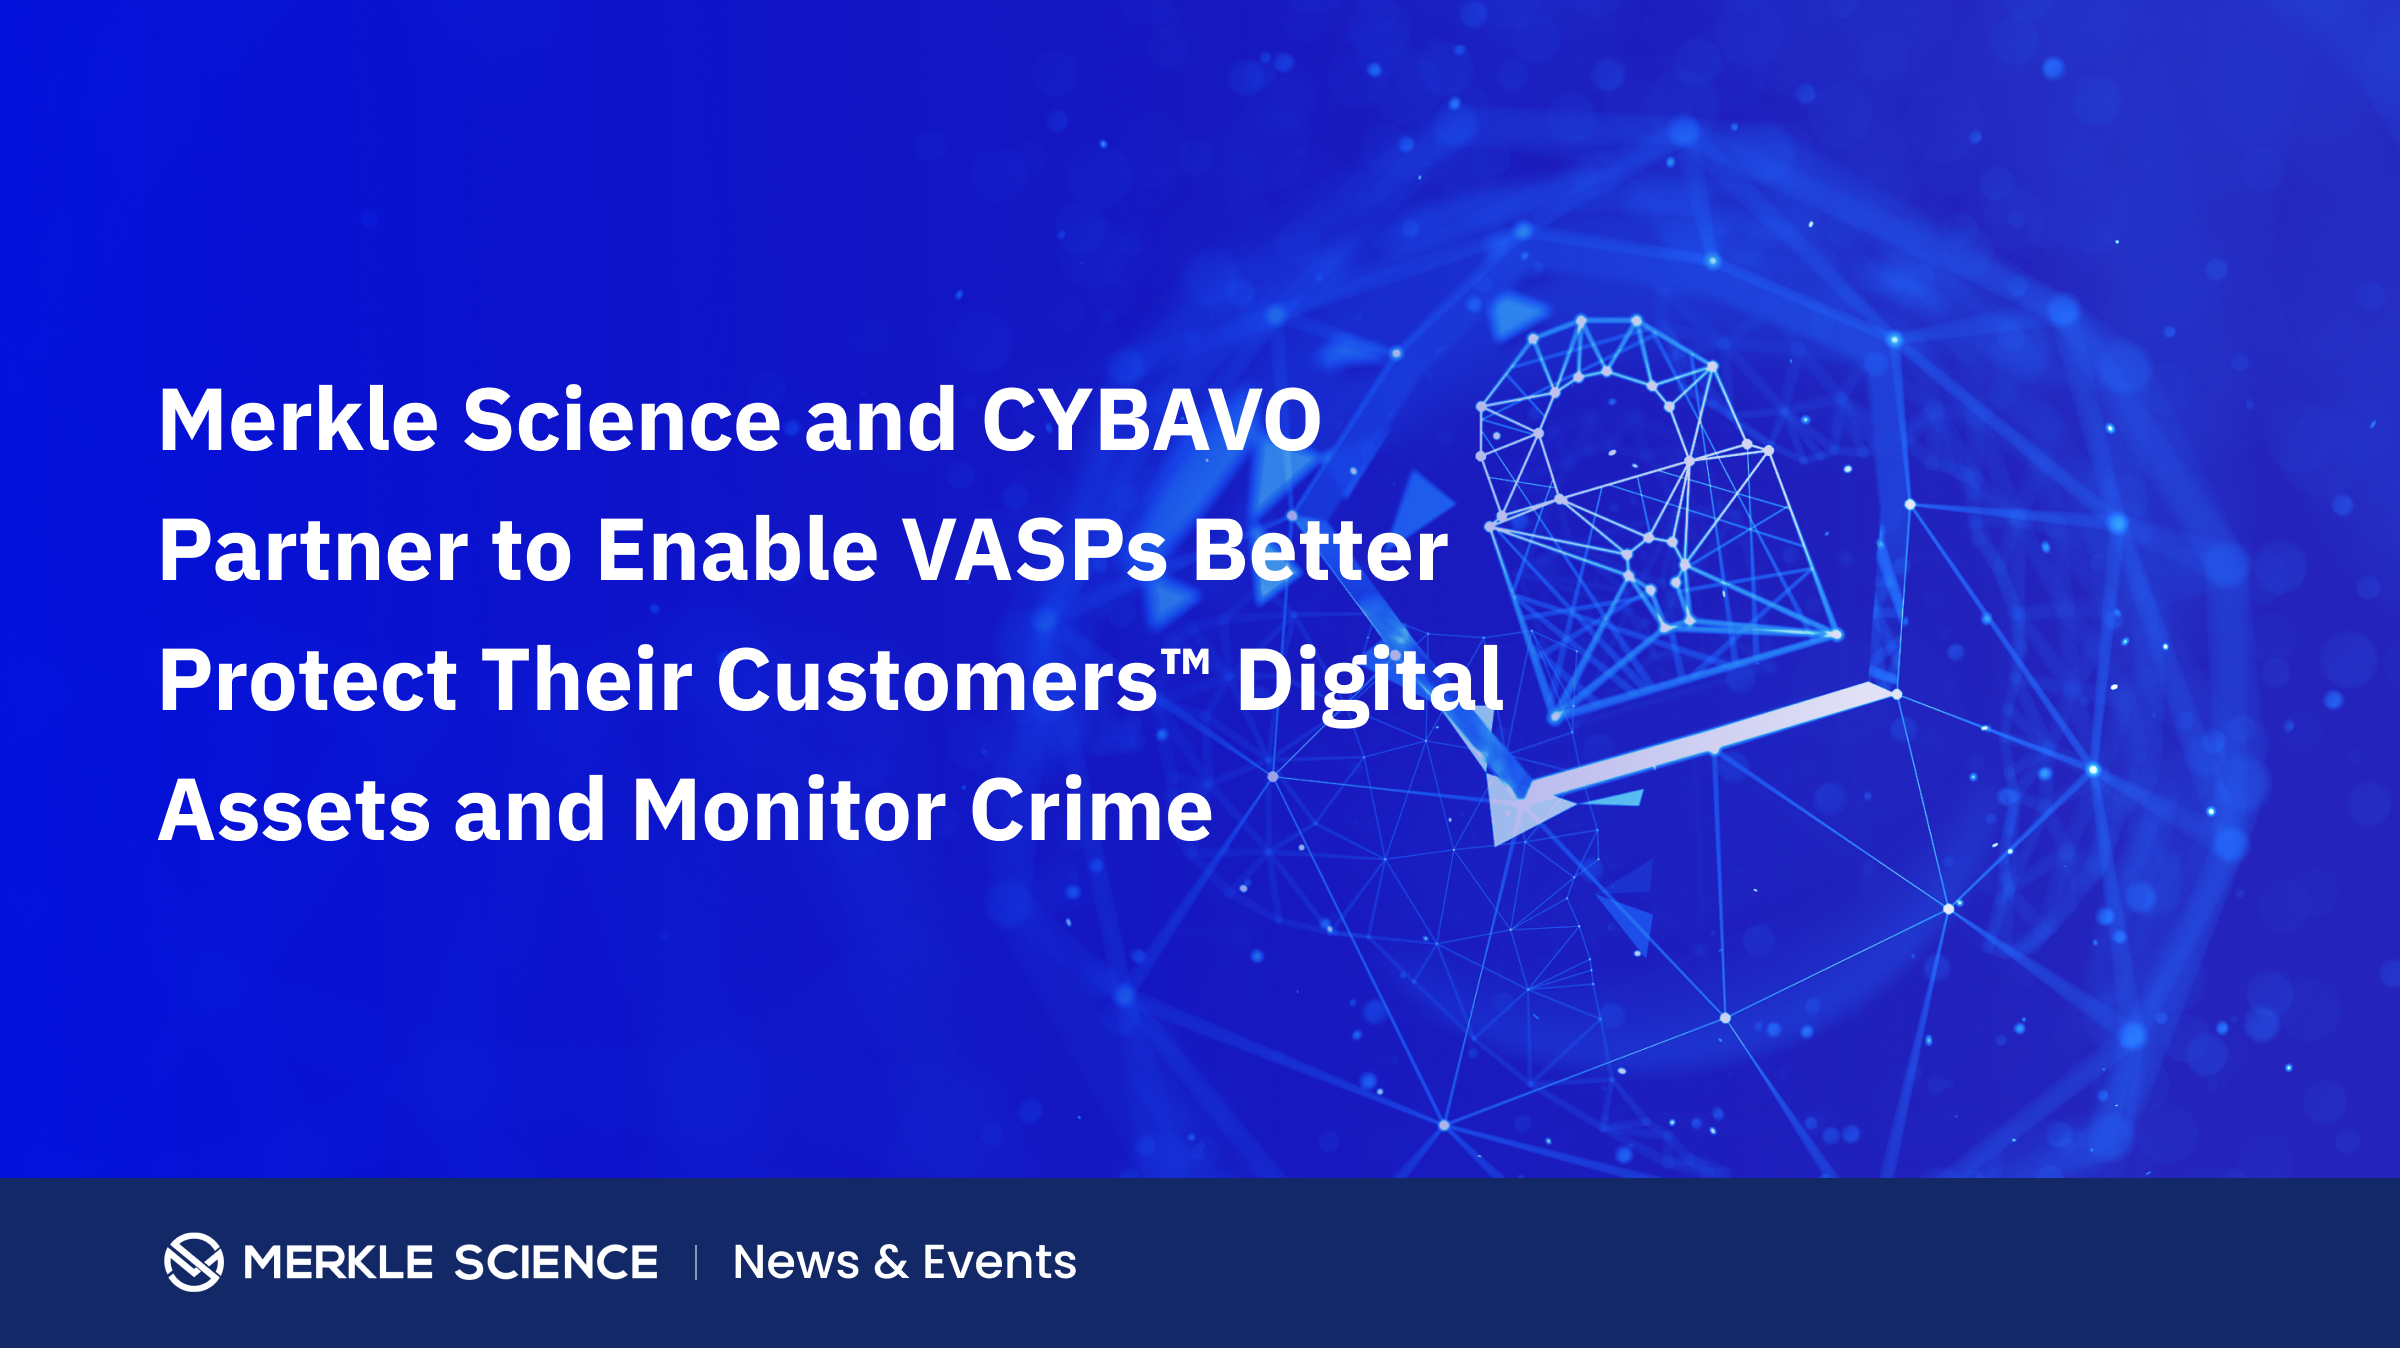 Merkle Science and CYBAVO Partner to Enable VASPs Better Protect Their Customers’ Digital Assets and Monitor Crime